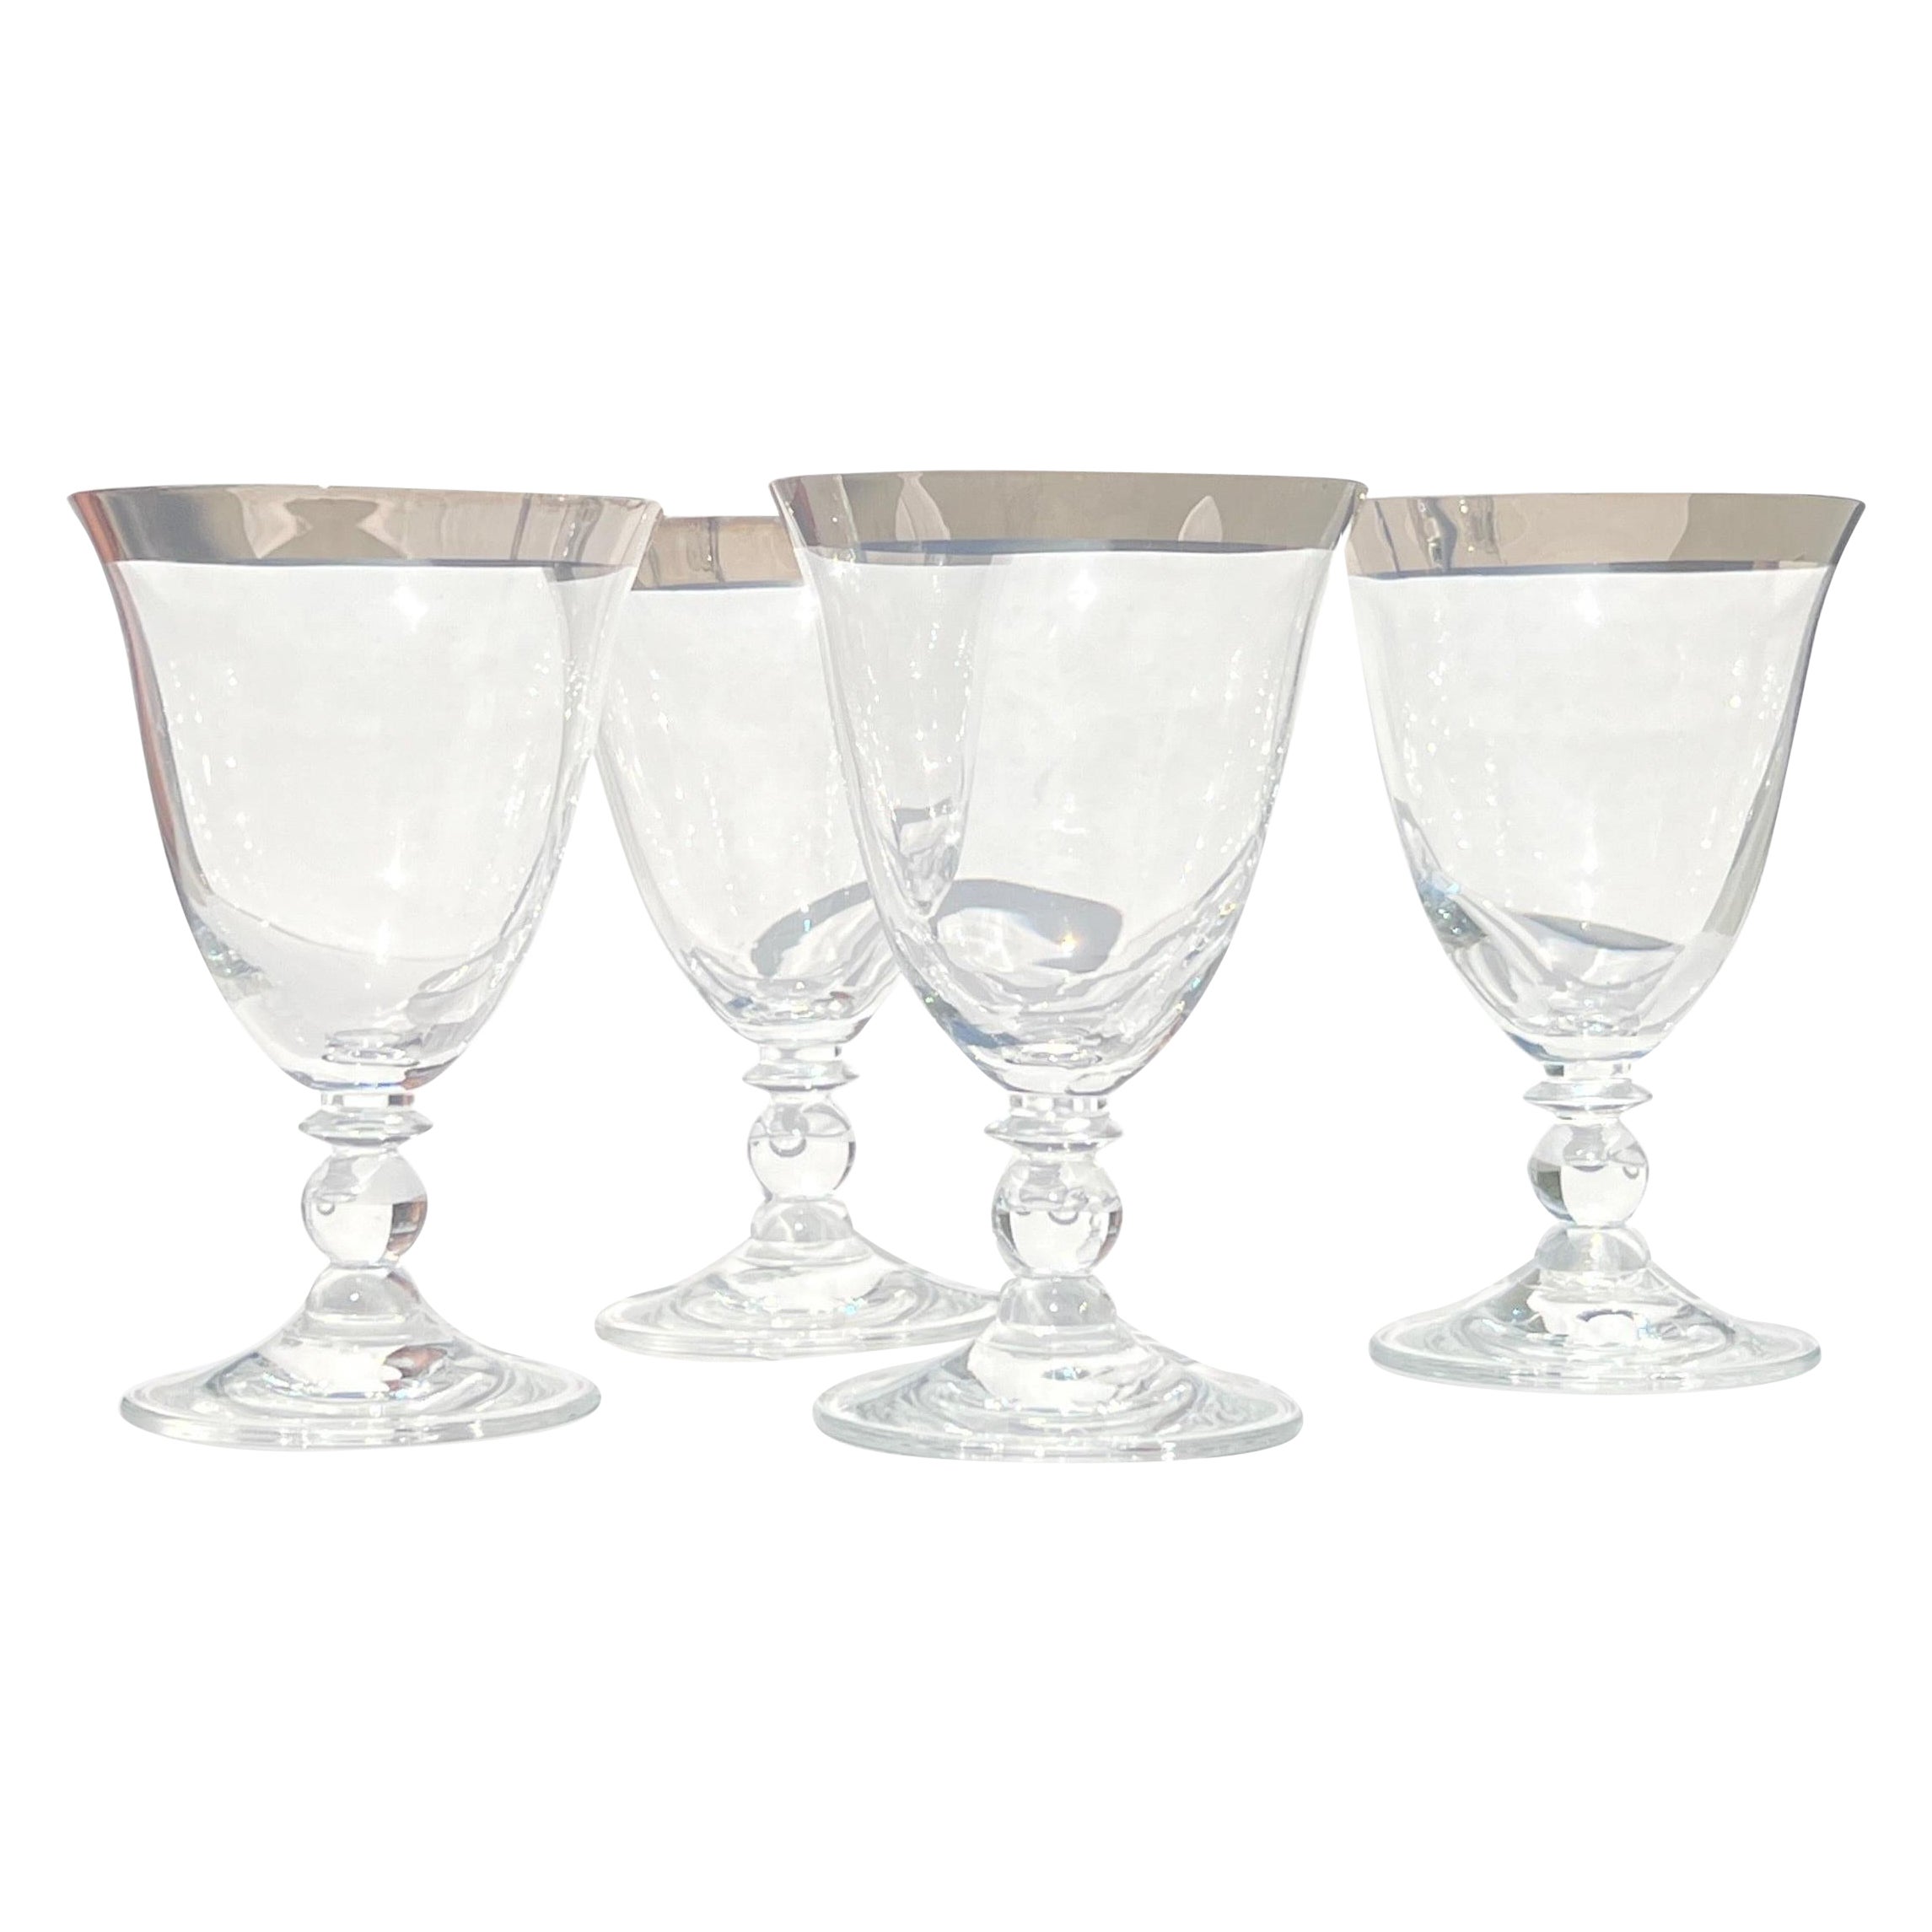 Set of Dorothy Thorpe Water Goblets with Silver Rim Design, c. 1970's